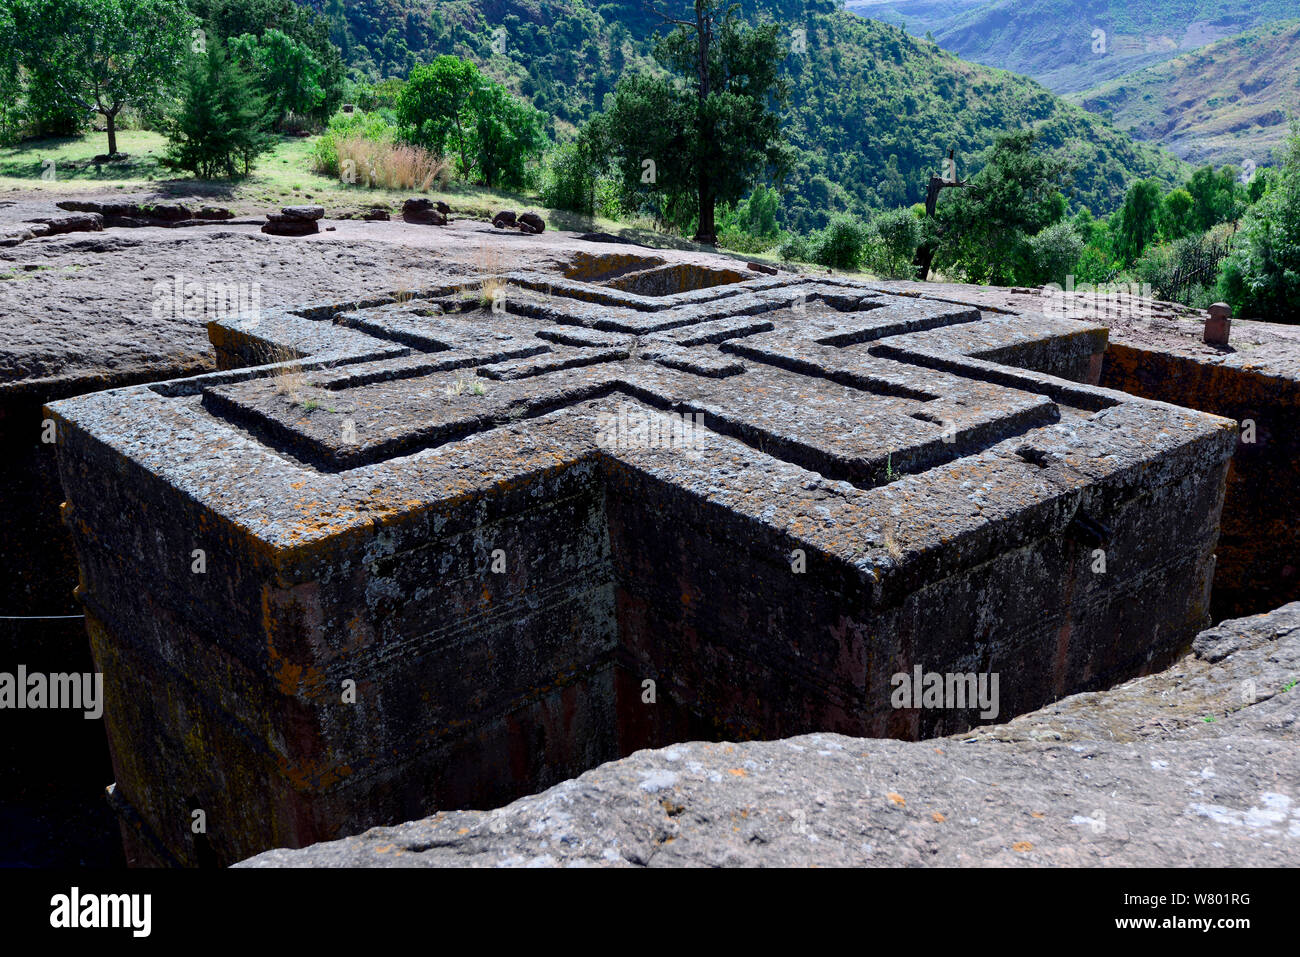 Bet Giyorgis Church, a church carved out of solid tufa rock, view from the top showing its cross shape, Lalibela. UNESCO World Heritage Site. Ethiopia, December 2014. Stock Photo